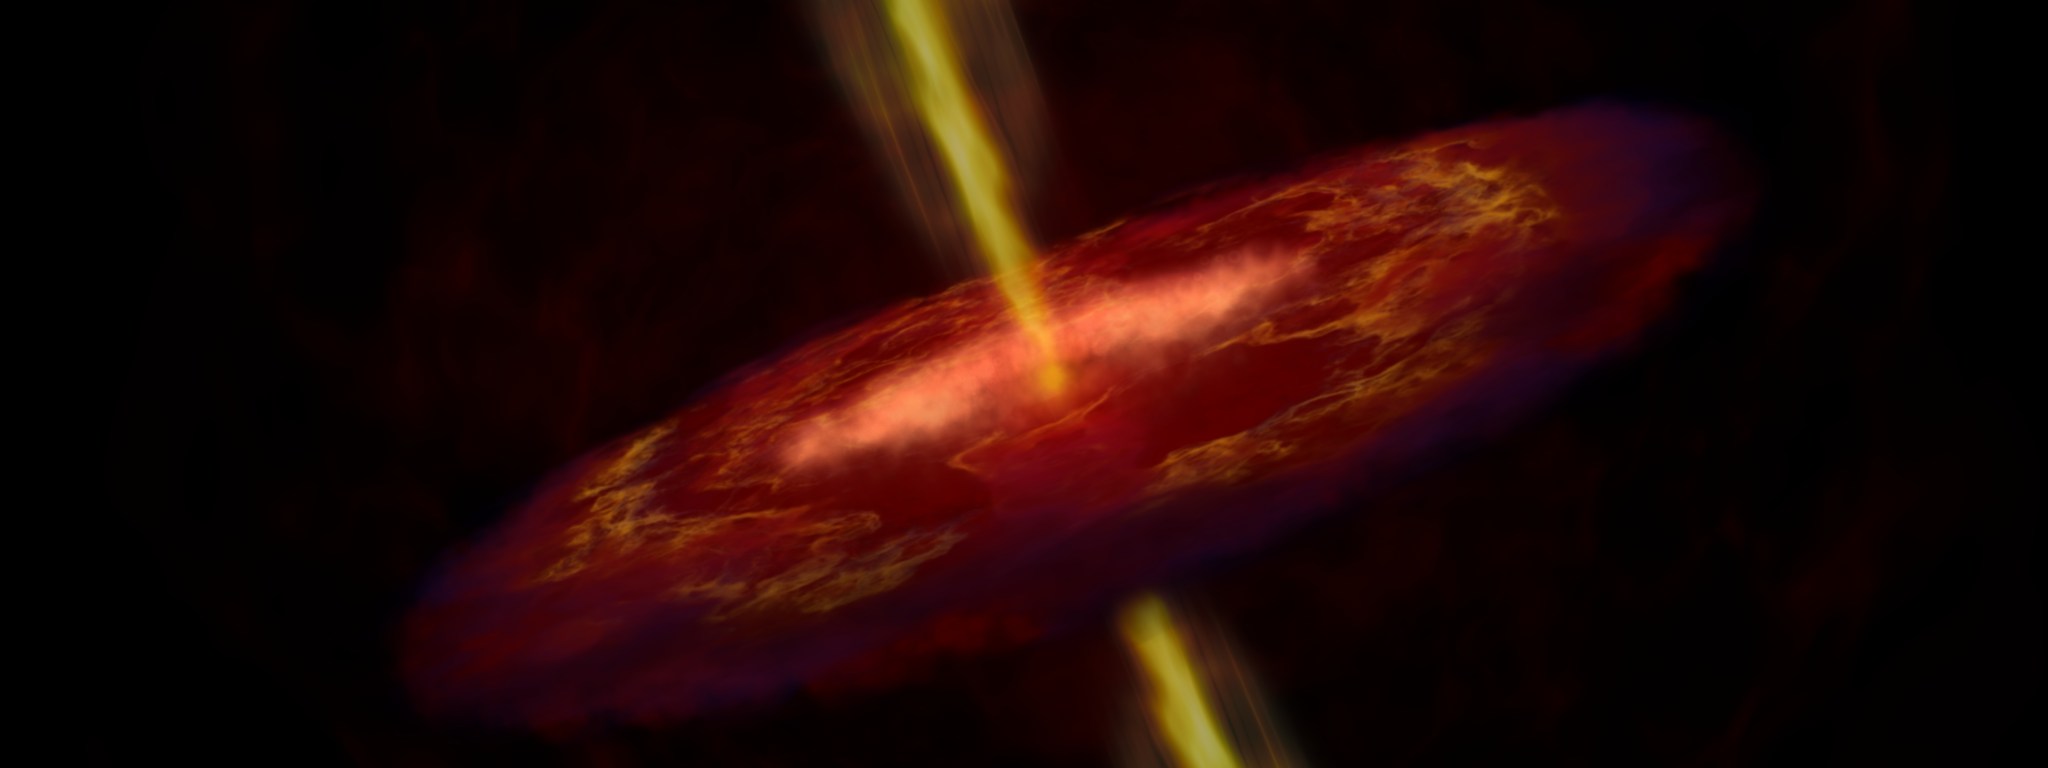 Artist's concept of a protoplanetary disk